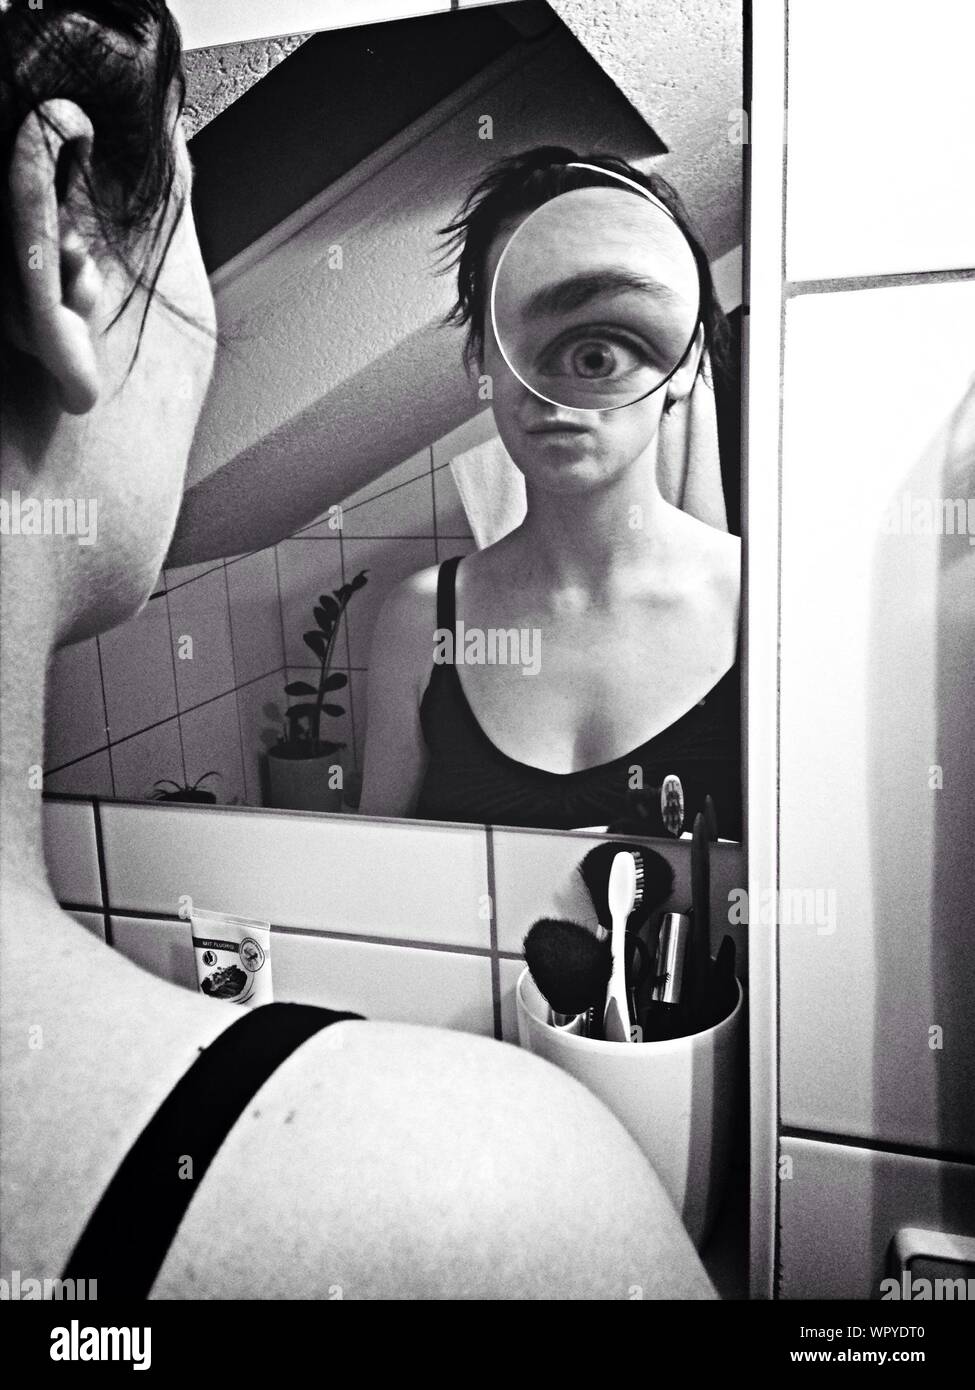 Reflection Of Young Woman In Mirror With Magnified Eye Stock Photo